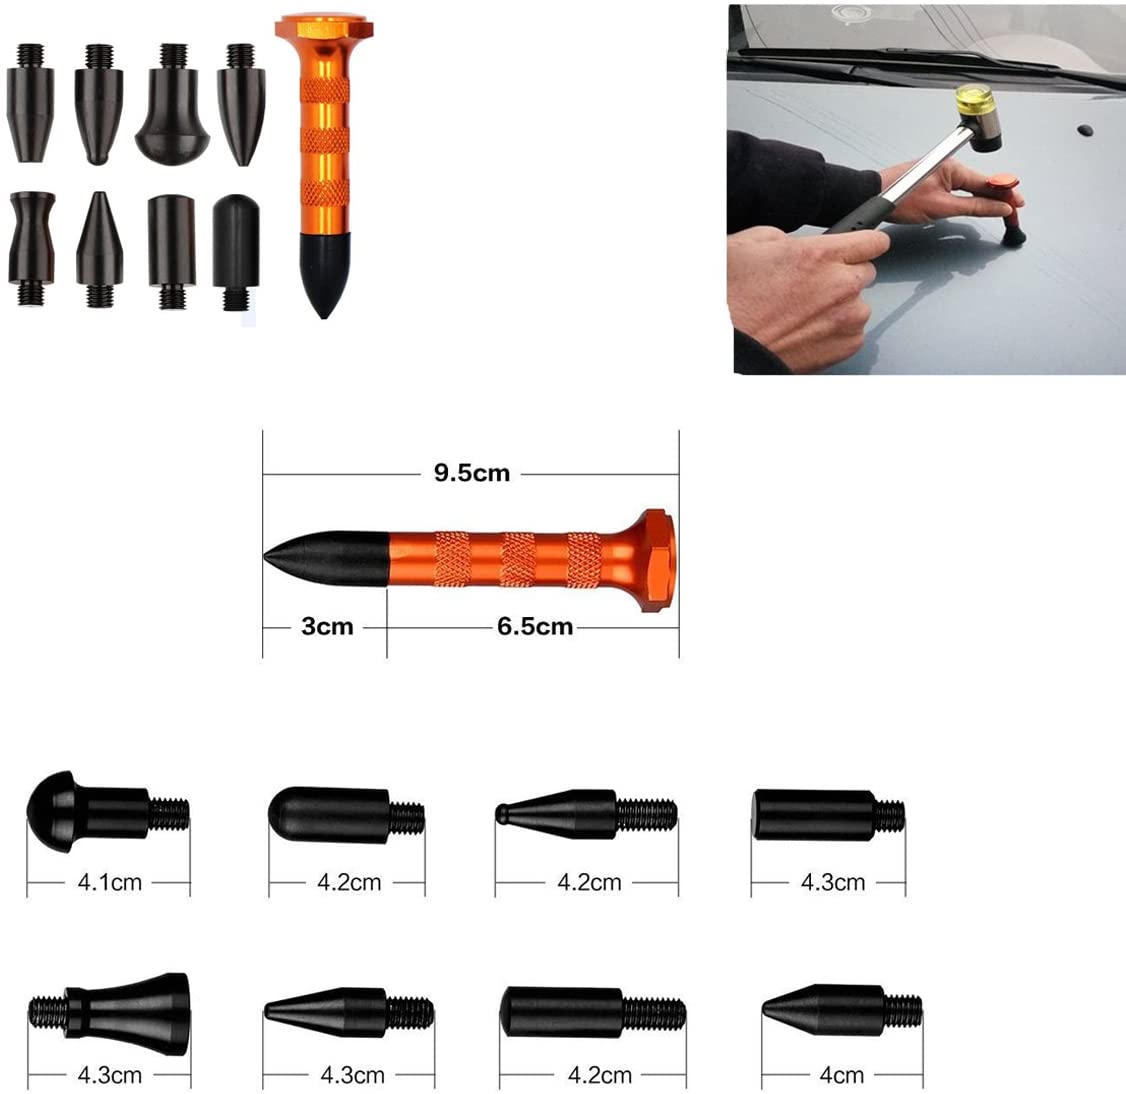 Full Set Paintless Dent Repair Removal Hail Tools Rods Puller Tap Down Hammer for Car Body Hail Damage Door Dent Removal